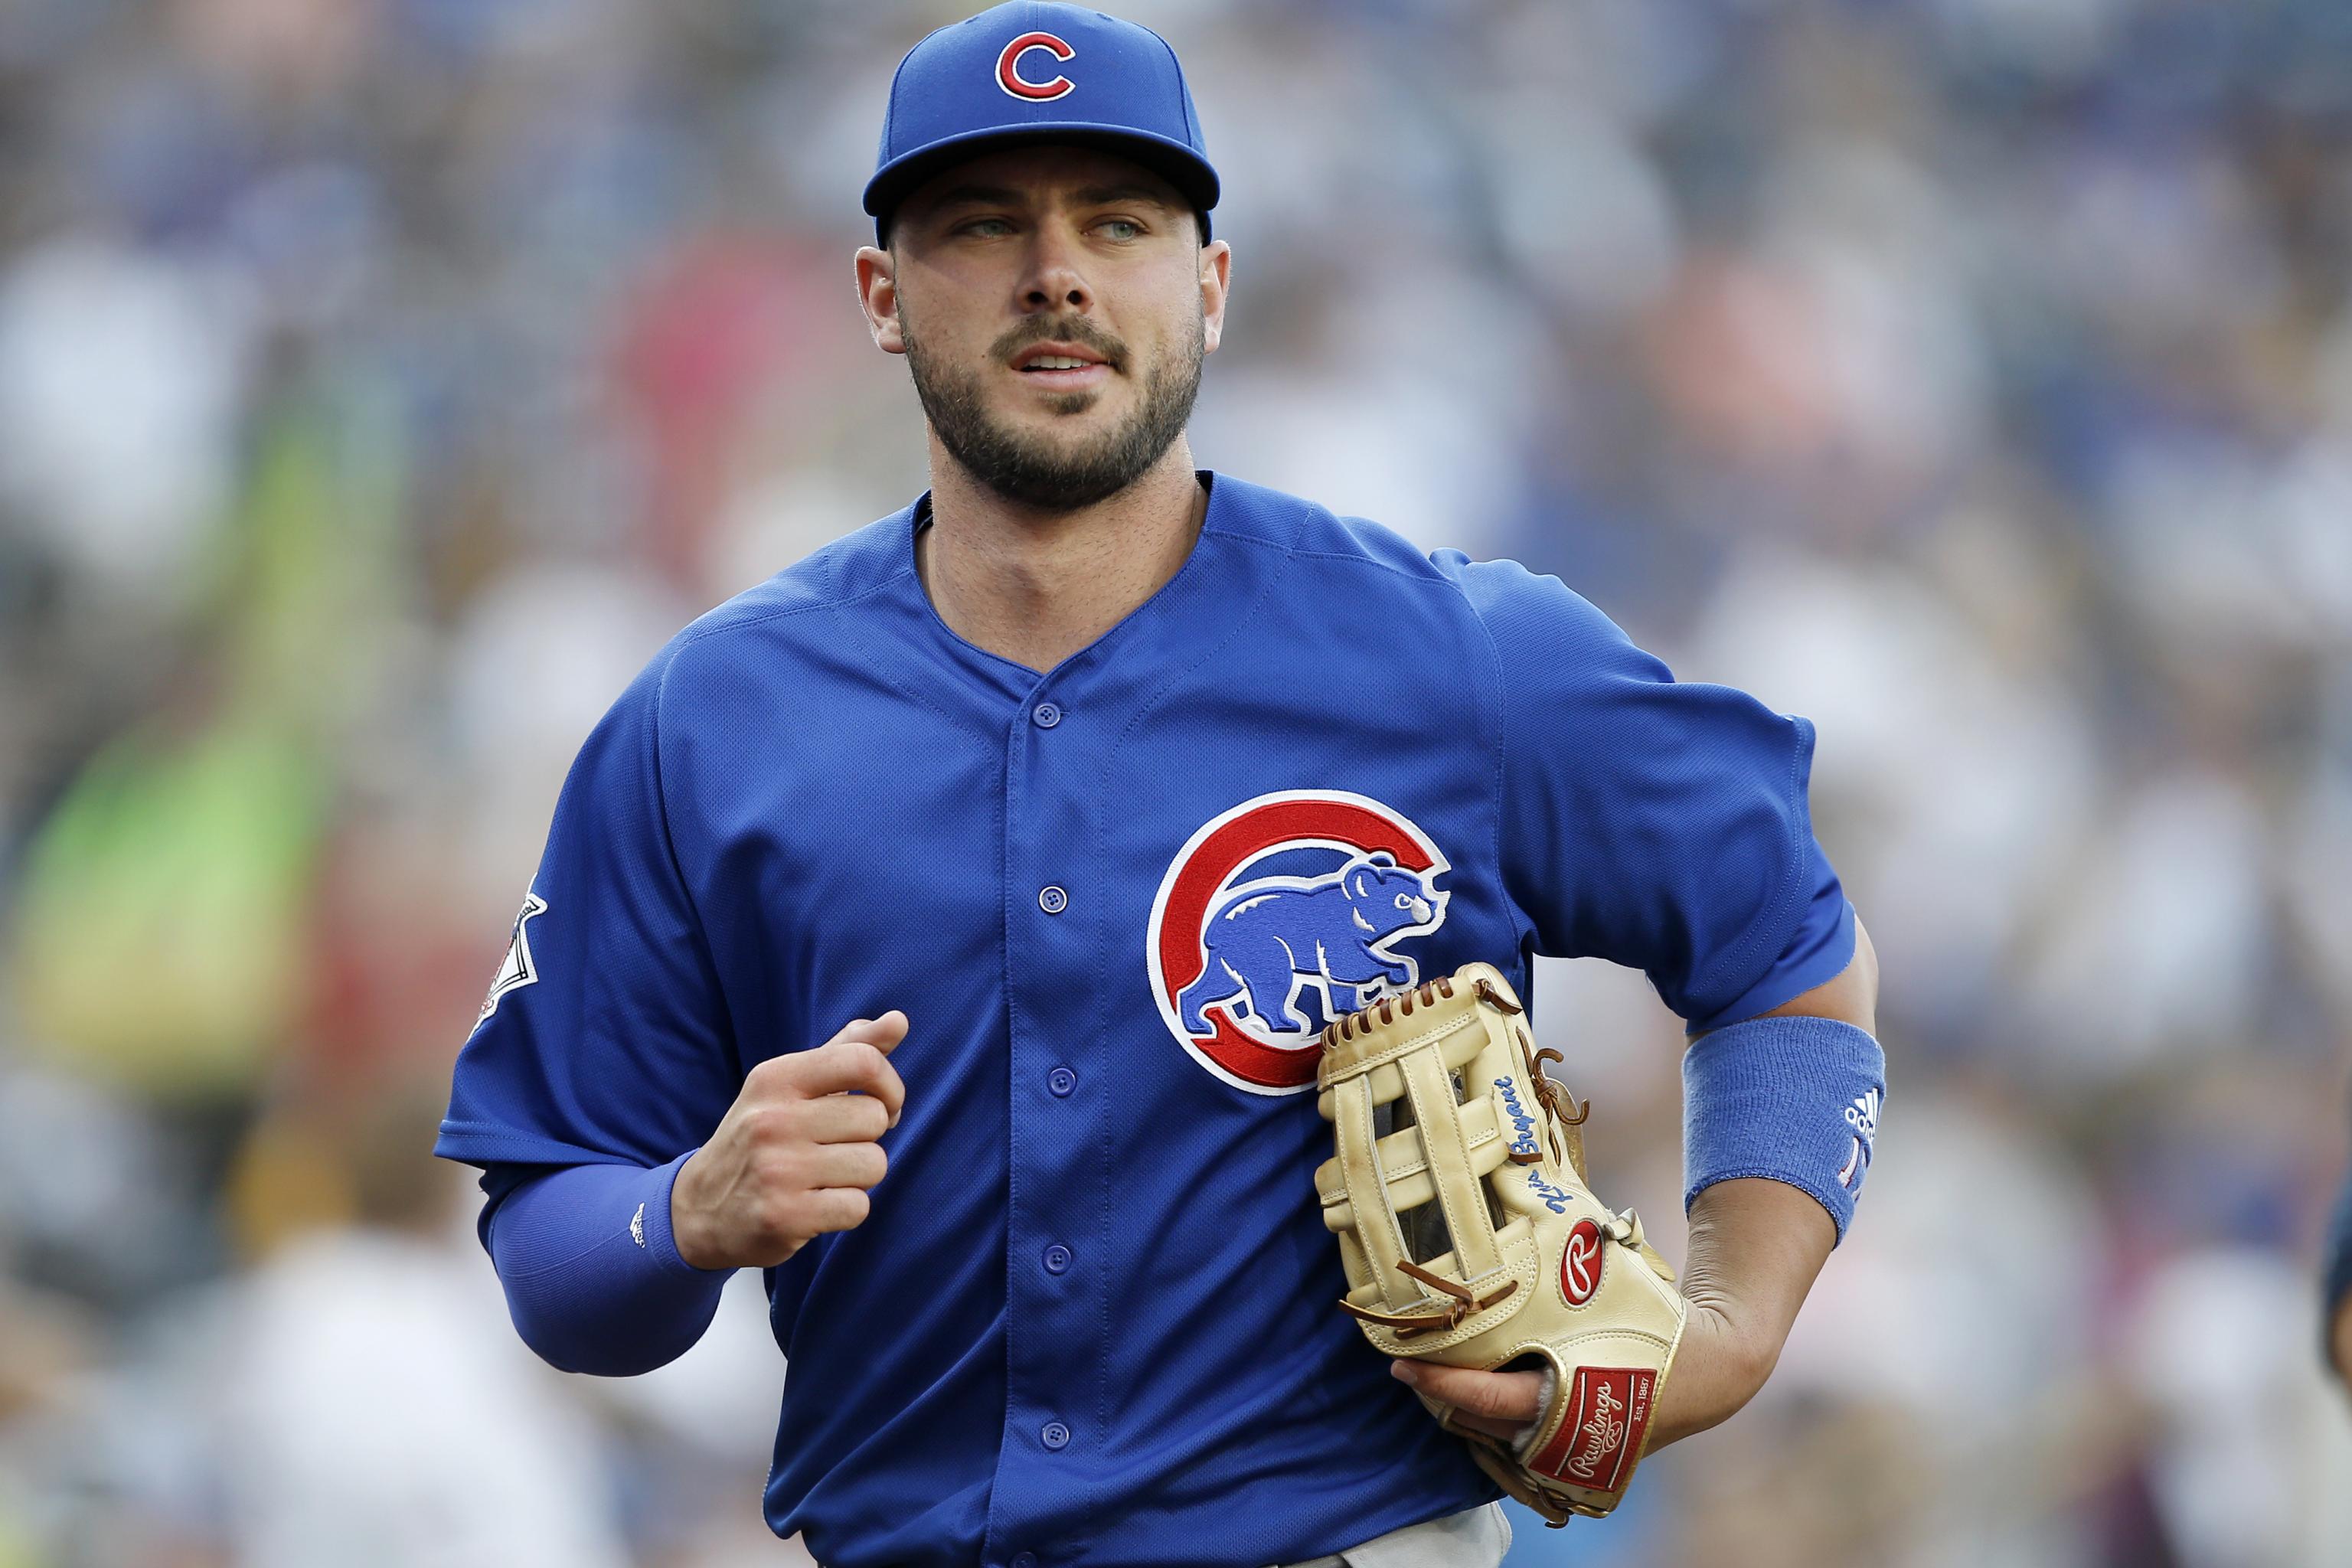 Cubs' Kris Bryant has top-selling MLB jersey of 2015 